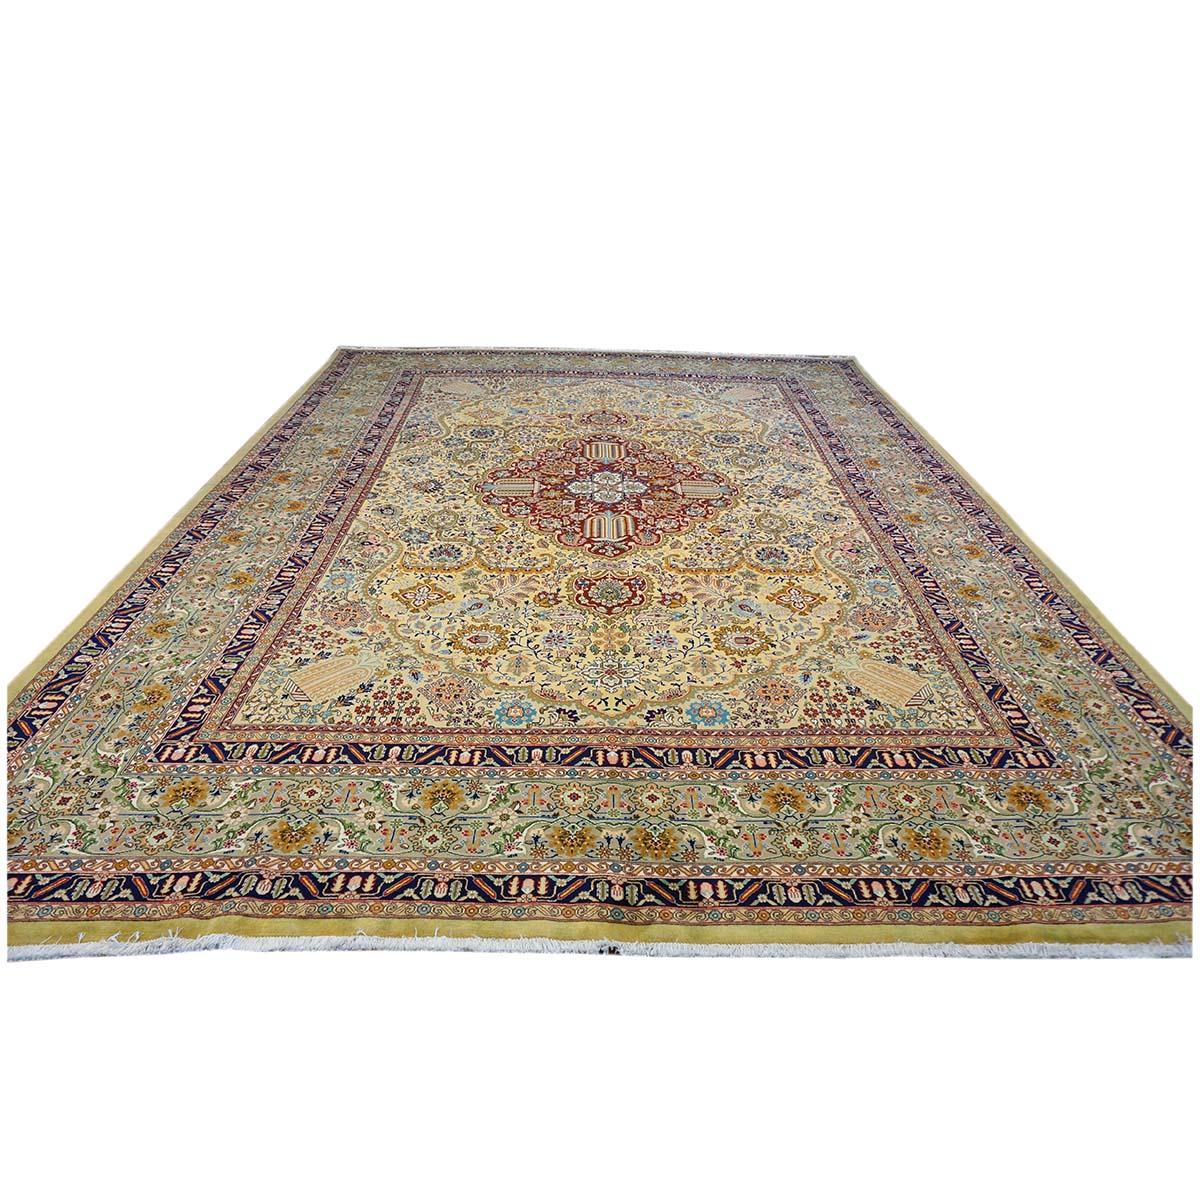 Hand-Woven Antique Persian Tabriz 10x13 Tan, Taupe, Navy, & Gold Handmade Area Rug For Sale